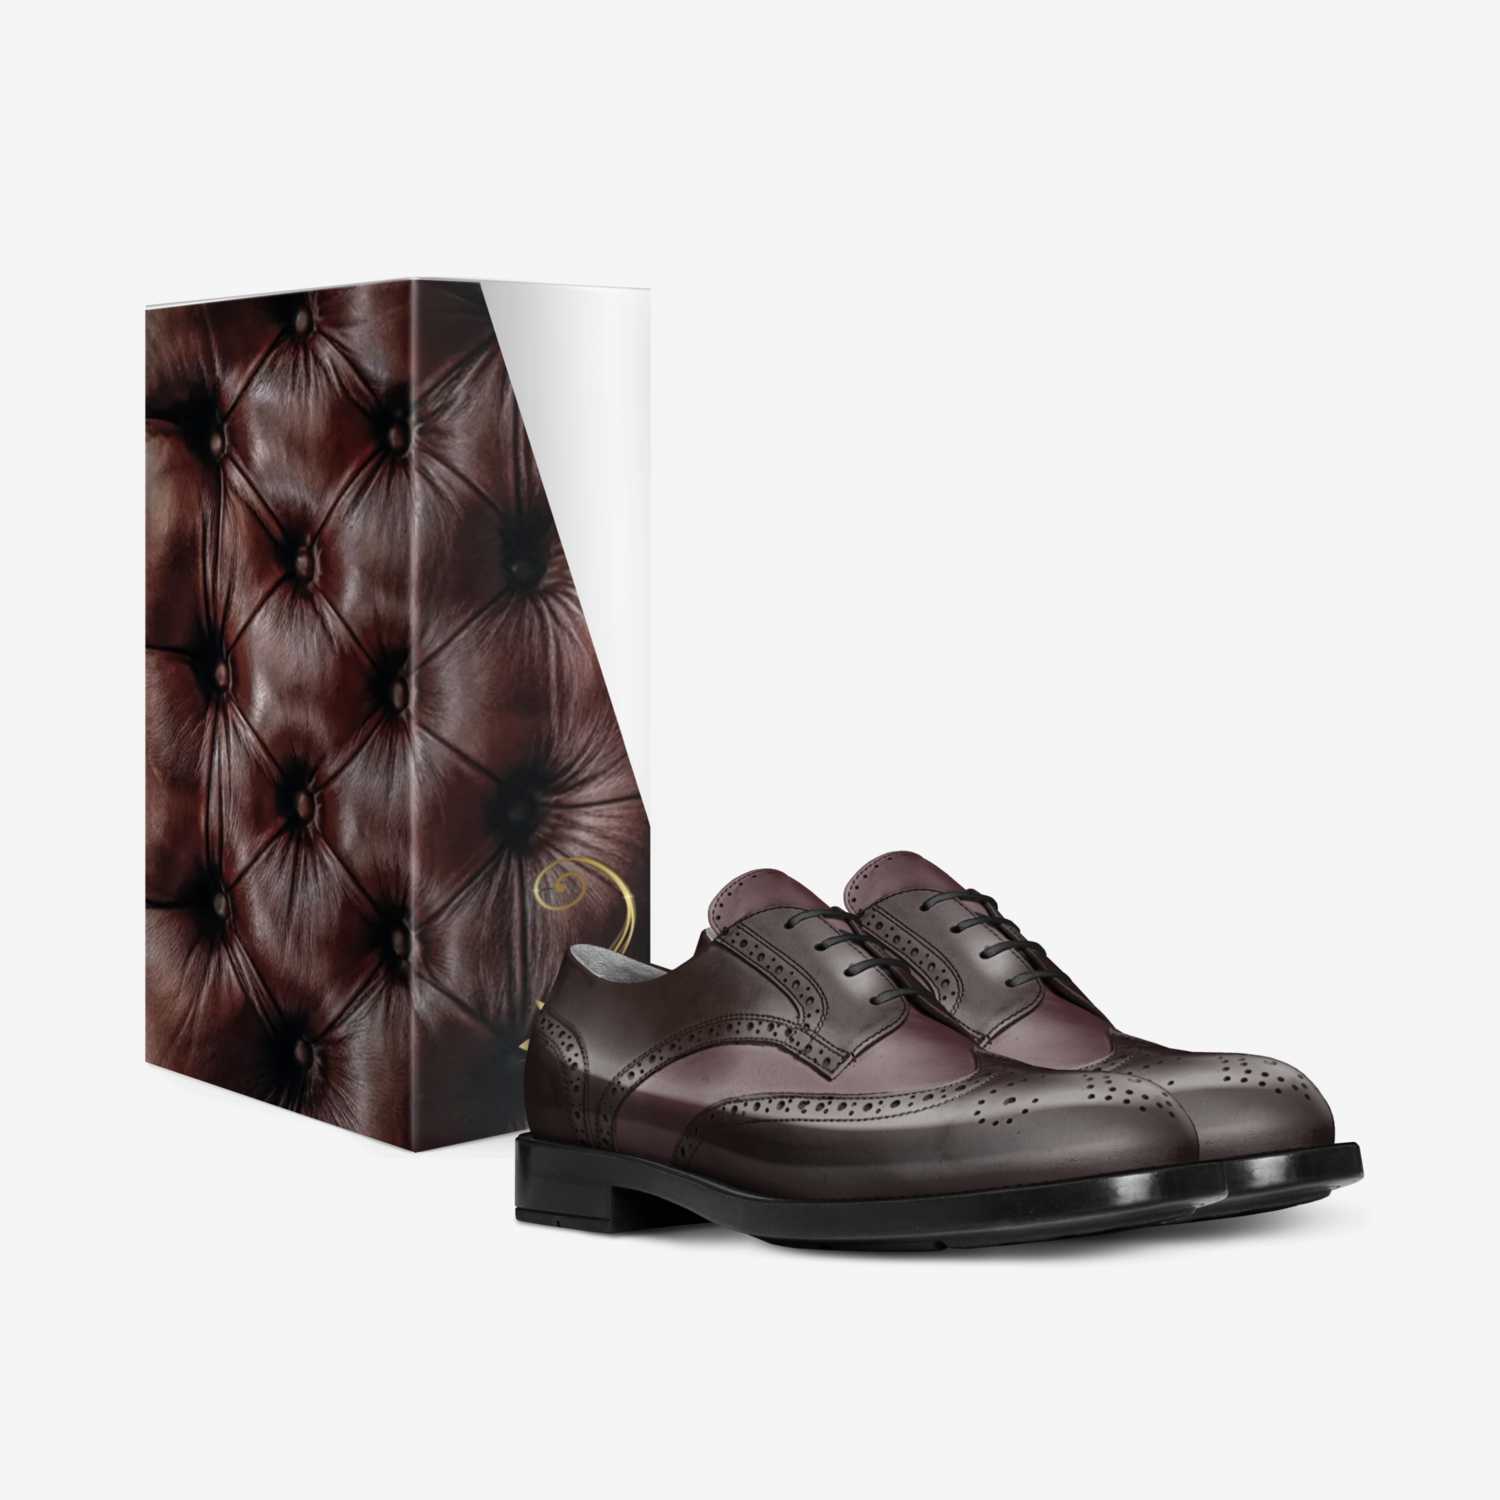 The Kingsmen  custom made in Italy shoes by The American Academy for Young Professionals, Inc. | Box view